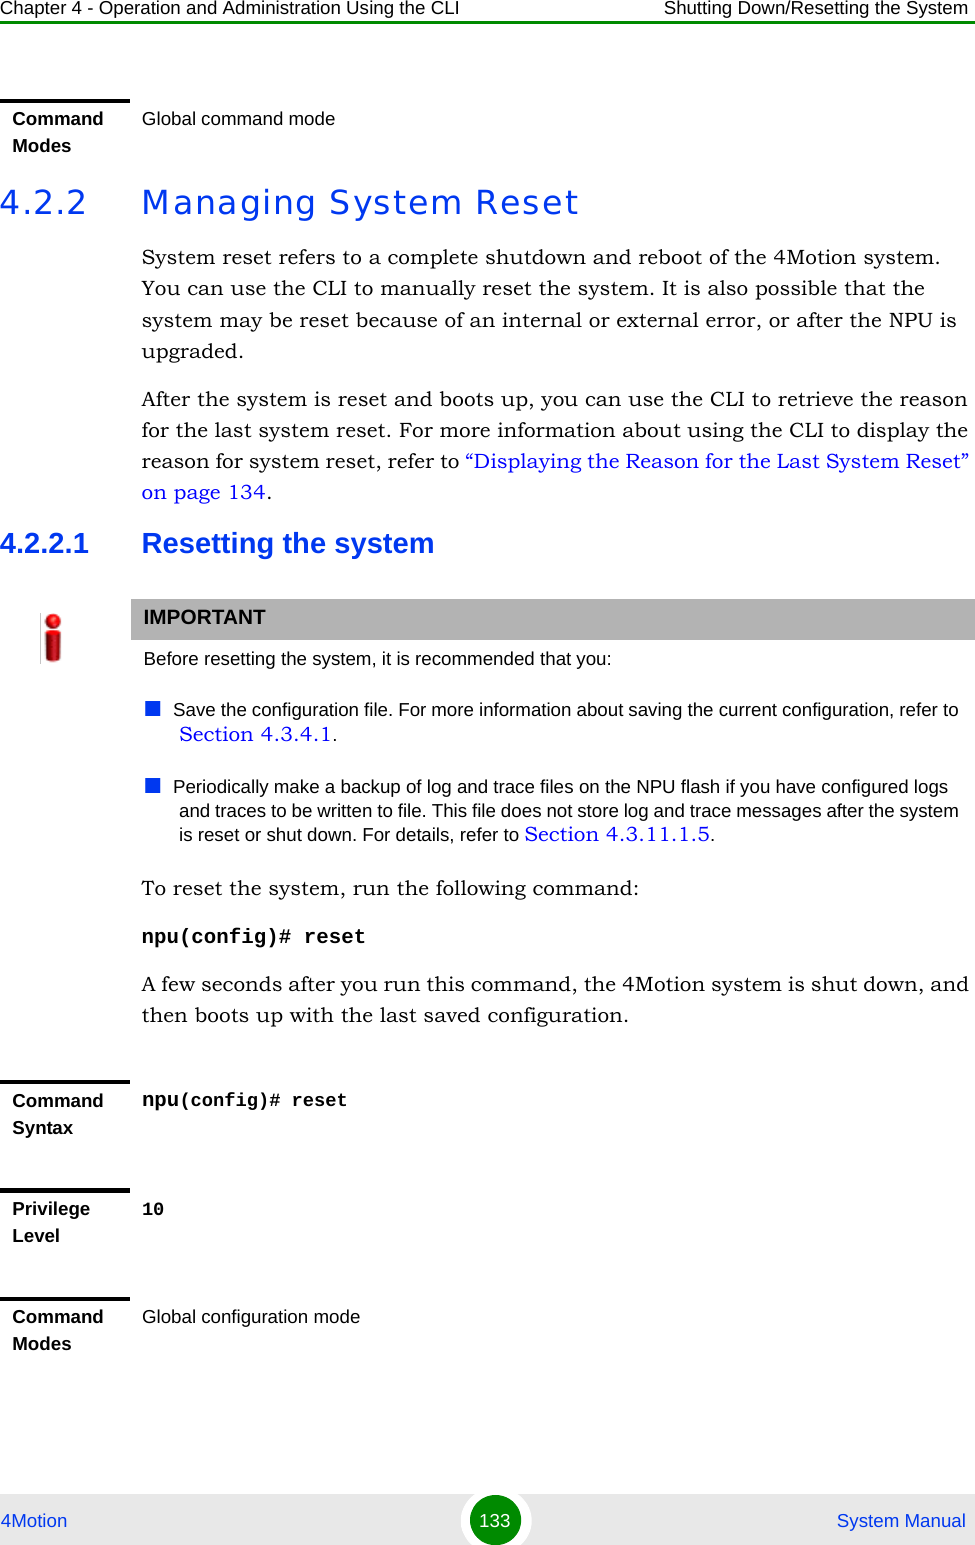 Chapter 4 - Operation and Administration Using the CLI Shutting Down/Resetting the System4Motion 133  System Manual4.2.2 Managing System ResetSystem reset refers to a complete shutdown and reboot of the 4Motion system. You can use the CLI to manually reset the system. It is also possible that the system may be reset because of an internal or external error, or after the NPU is upgraded. After the system is reset and boots up, you can use the CLI to retrieve the reason for the last system reset. For more information about using the CLI to display the reason for system reset, refer to “Displaying the Reason for the Last System Reset” on page 134.4.2.2.1 Resetting the systemTo reset the system, run the following command:npu(config)# resetA few seconds after you run this command, the 4Motion system is shut down, and then boots up with the last saved configuration. Command ModesGlobal command modeIMPORTANTBefore resetting the system, it is recommended that you:Save the configuration file. For more information about saving the current configuration, refer to Section 4.3.4.1. Periodically make a backup of log and trace files on the NPU flash if you have configured logs and traces to be written to file. This file does not store log and trace messages after the system is reset or shut down. For details, refer to Section 4.3.11.1.5.Command Syntaxnpu(config)# resetPrivilege Level10Command ModesGlobal configuration mode